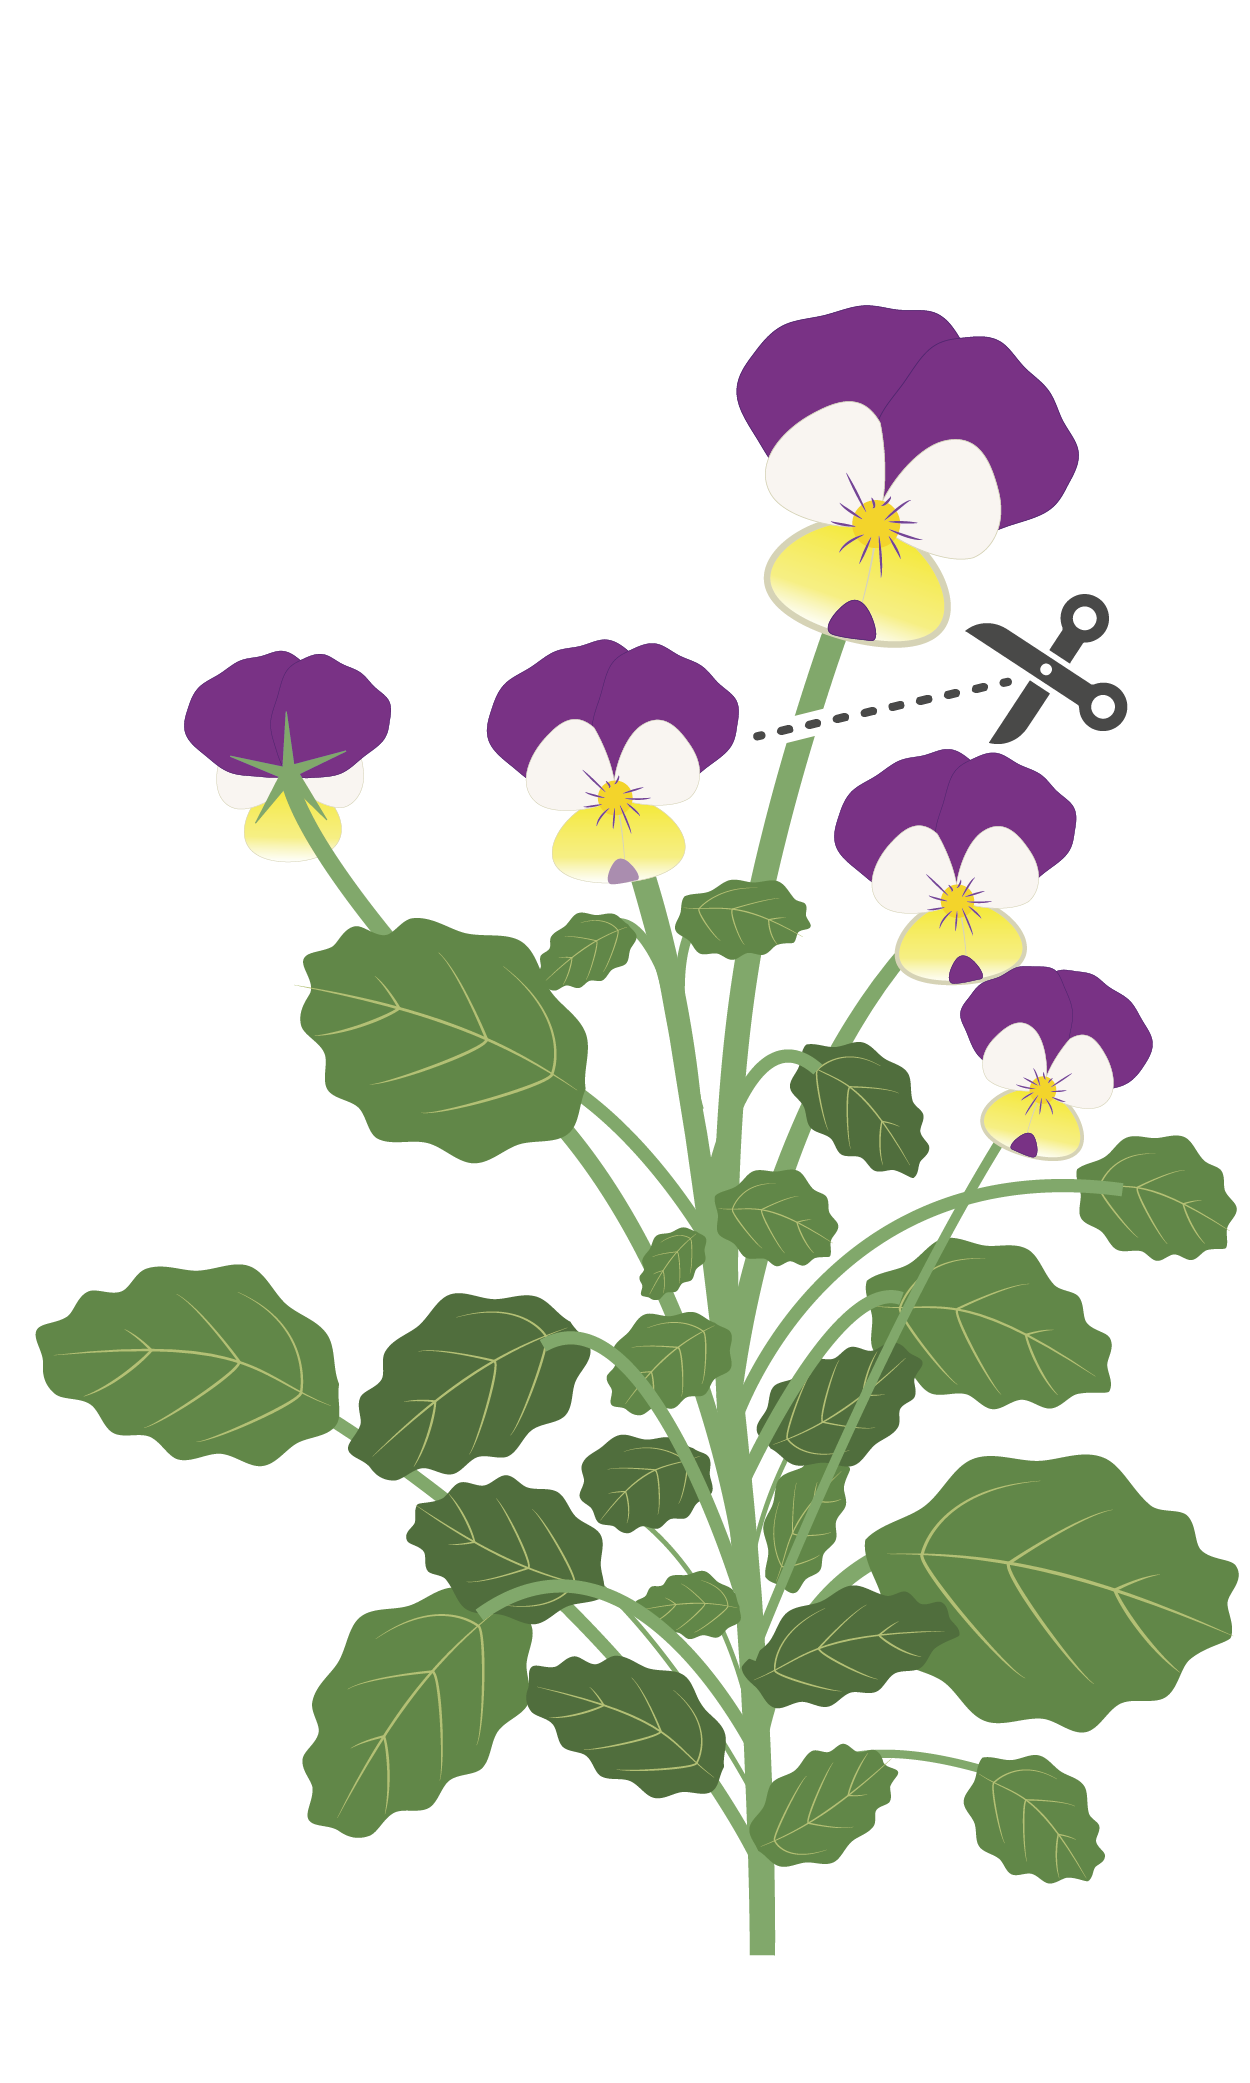 How do you harvest yellow jump pansies?